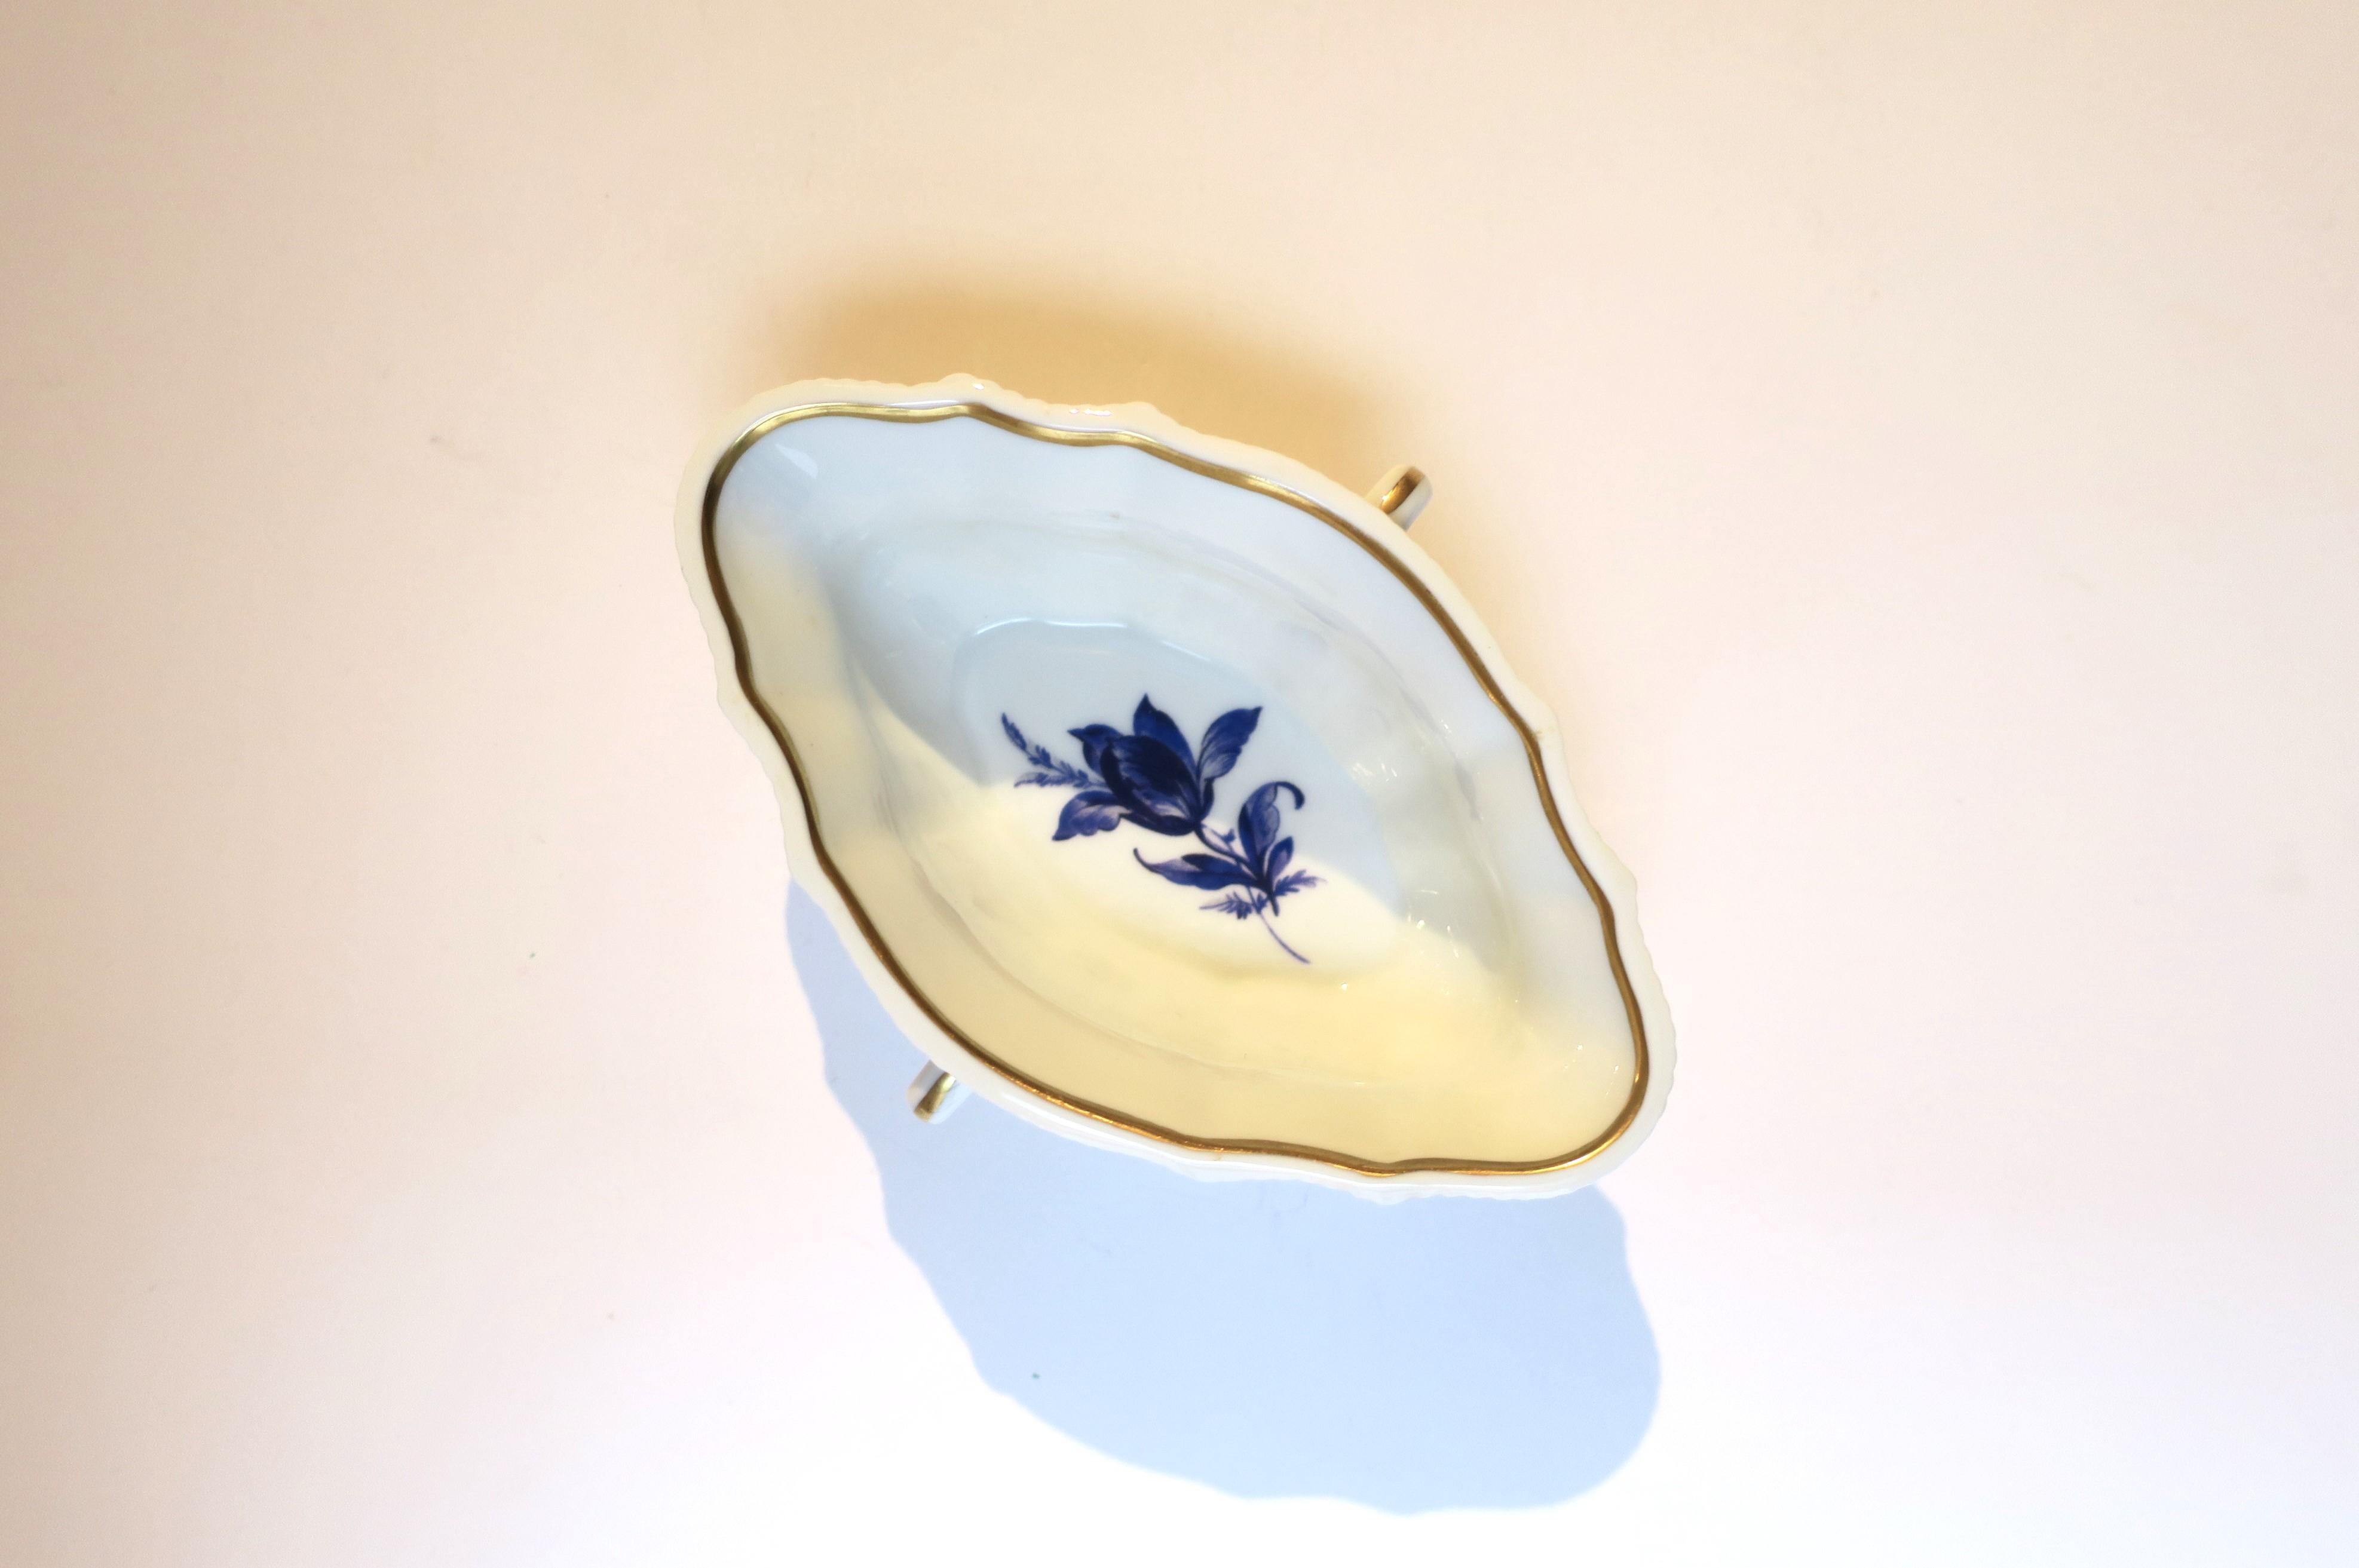 A vintage Italian white and blue porcelain bowl by designer Richard Ginori, circa mid-20th century, Italy. Bowl with handles is white glazed Italian porcelain with blue flower design at center and gold hand-painted detail on edges. A great piece for